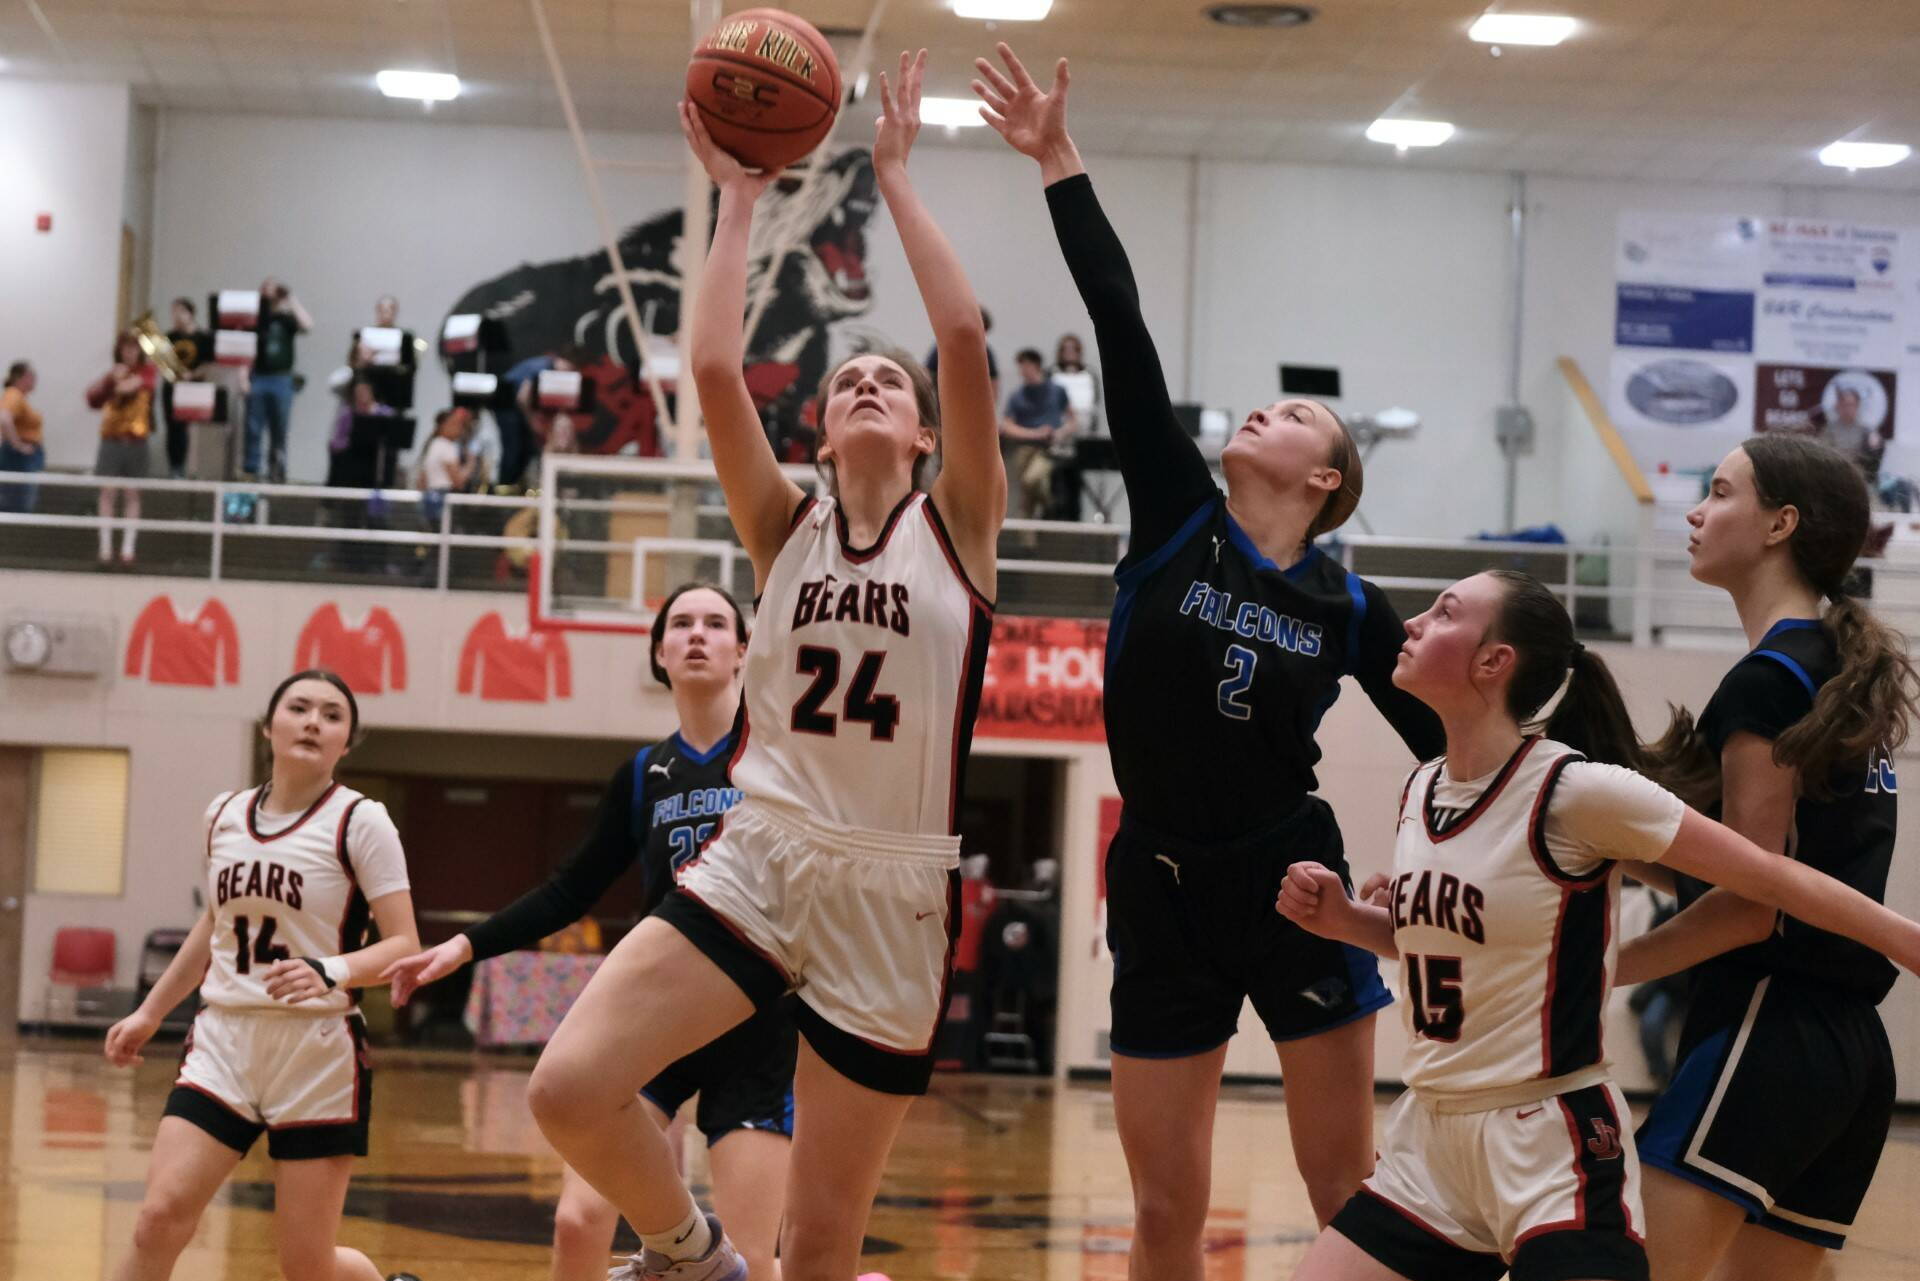 Juneau-Douglas High School: Yadaa.at Kalé senior Mila Hargrave (24) shoots under pressure from Thunder Mountain High School senior Ashlyn Gates (2) as JDHS sophomore Gwen Nizich (15) blocks out TMHS junior Cailynn Baxter (23) during the Crimson Bears 42-28 loss to the Falcons on Feb. 3 at the George Houston Gymnasium. The two teams split games during the weekend. (Klas Stolpe/Juneau Empire file photo)